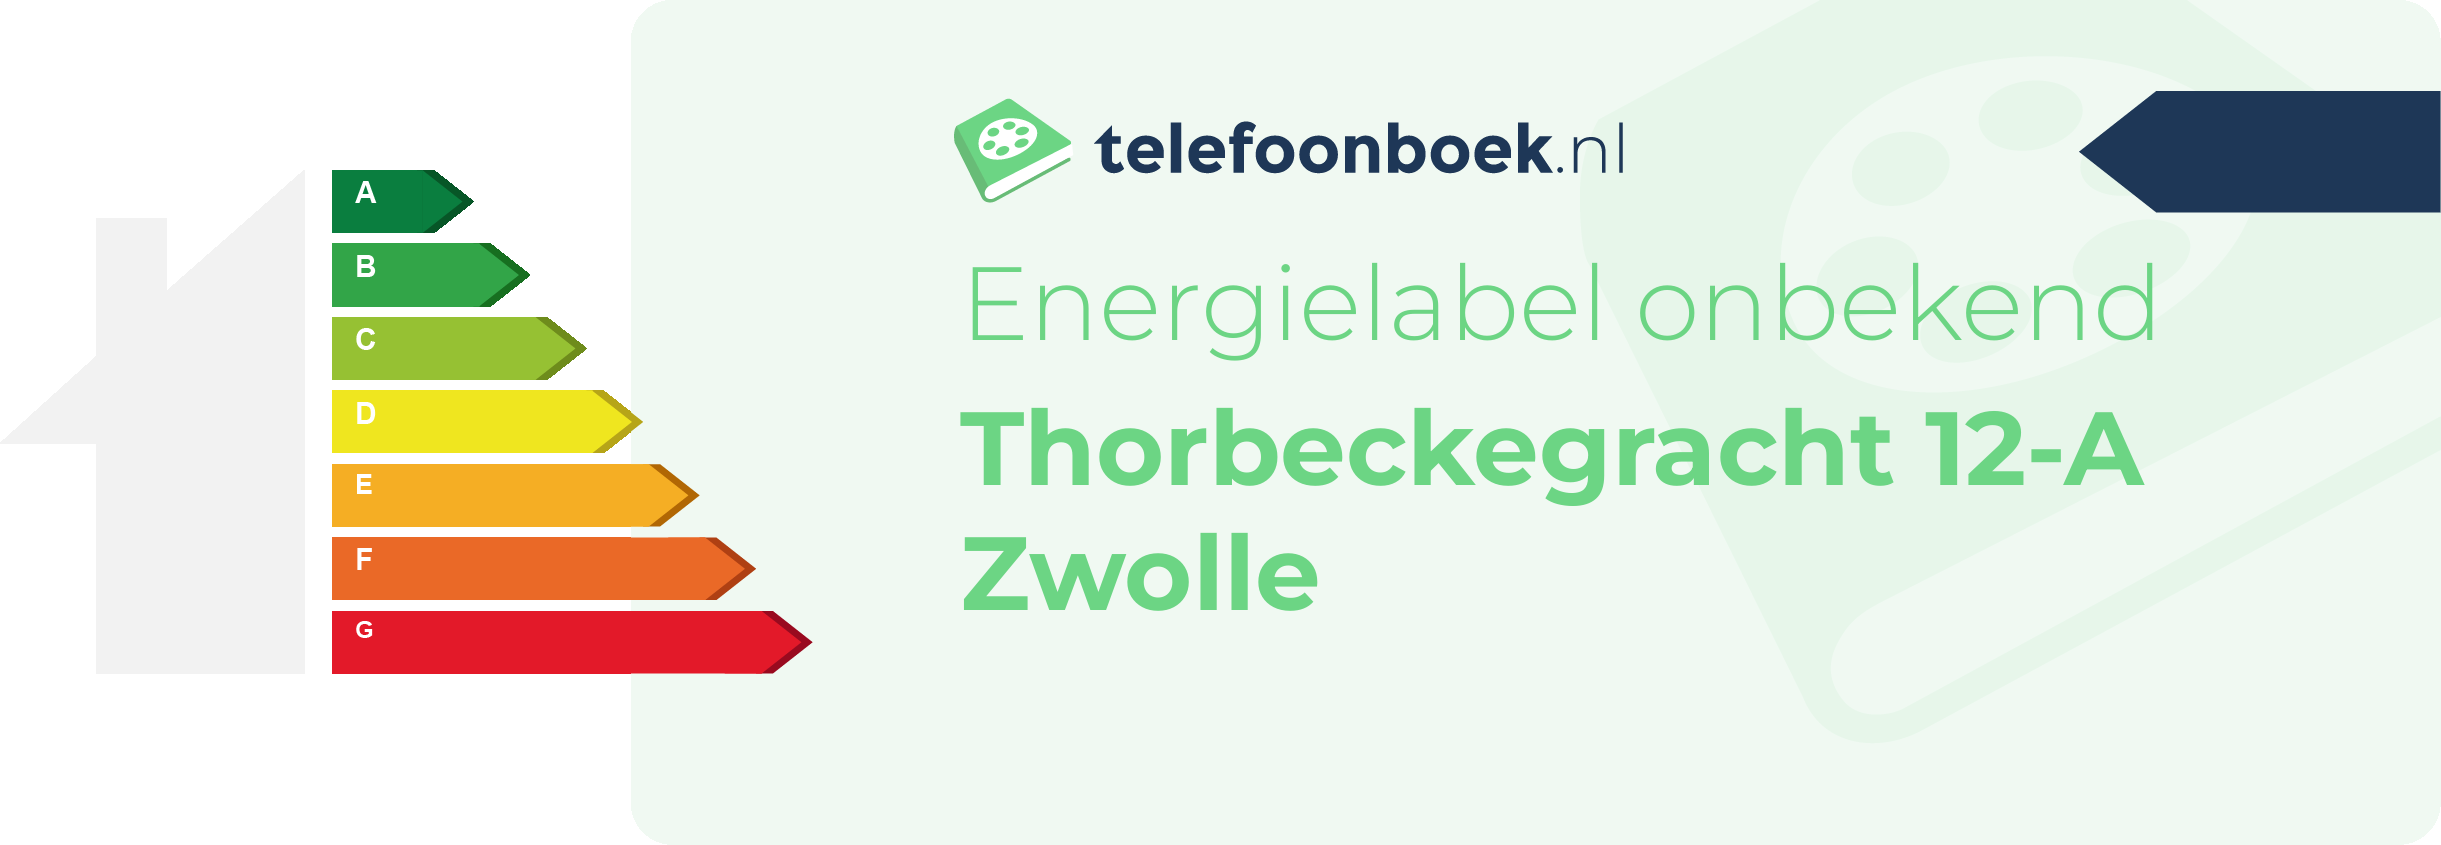 Energielabel Thorbeckegracht 12-A Zwolle